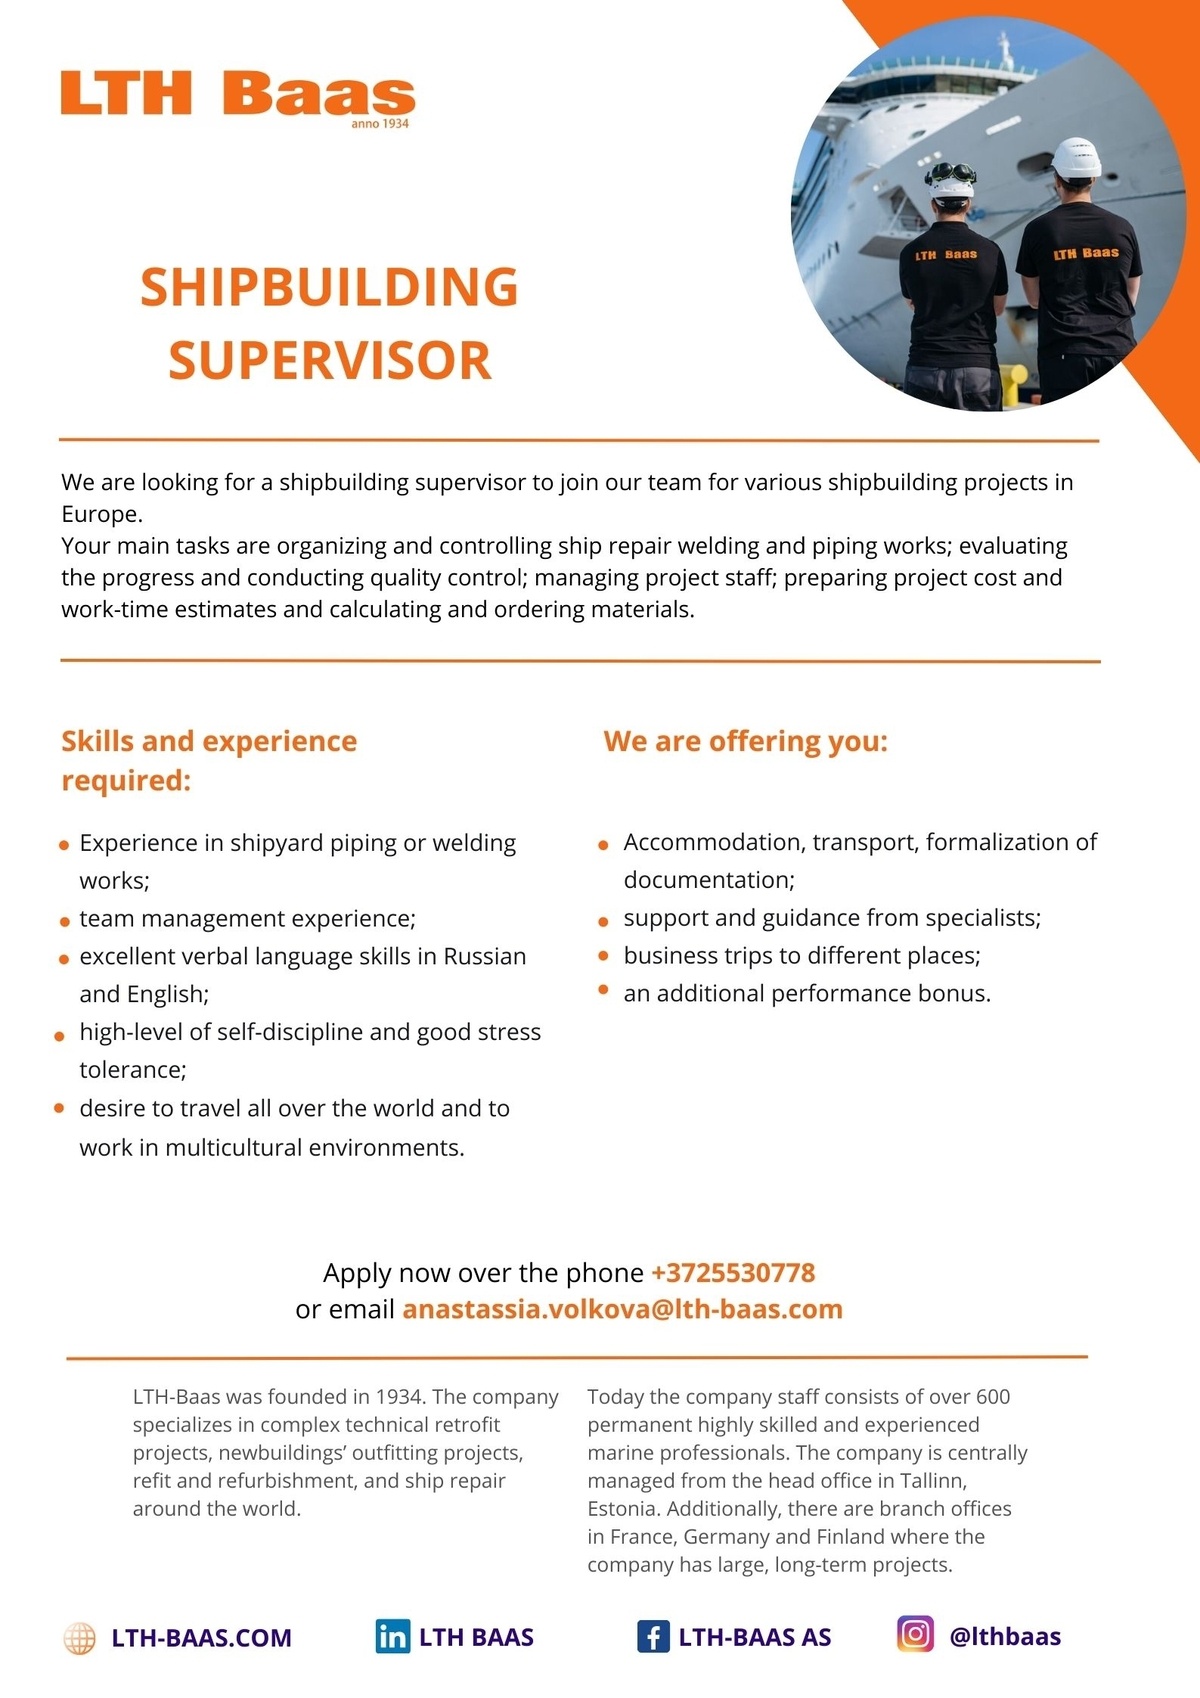 LTH-Baas AS SHIPBUILDING SUPERVISOR (PIPING, WELDING, STEEL WORKS)